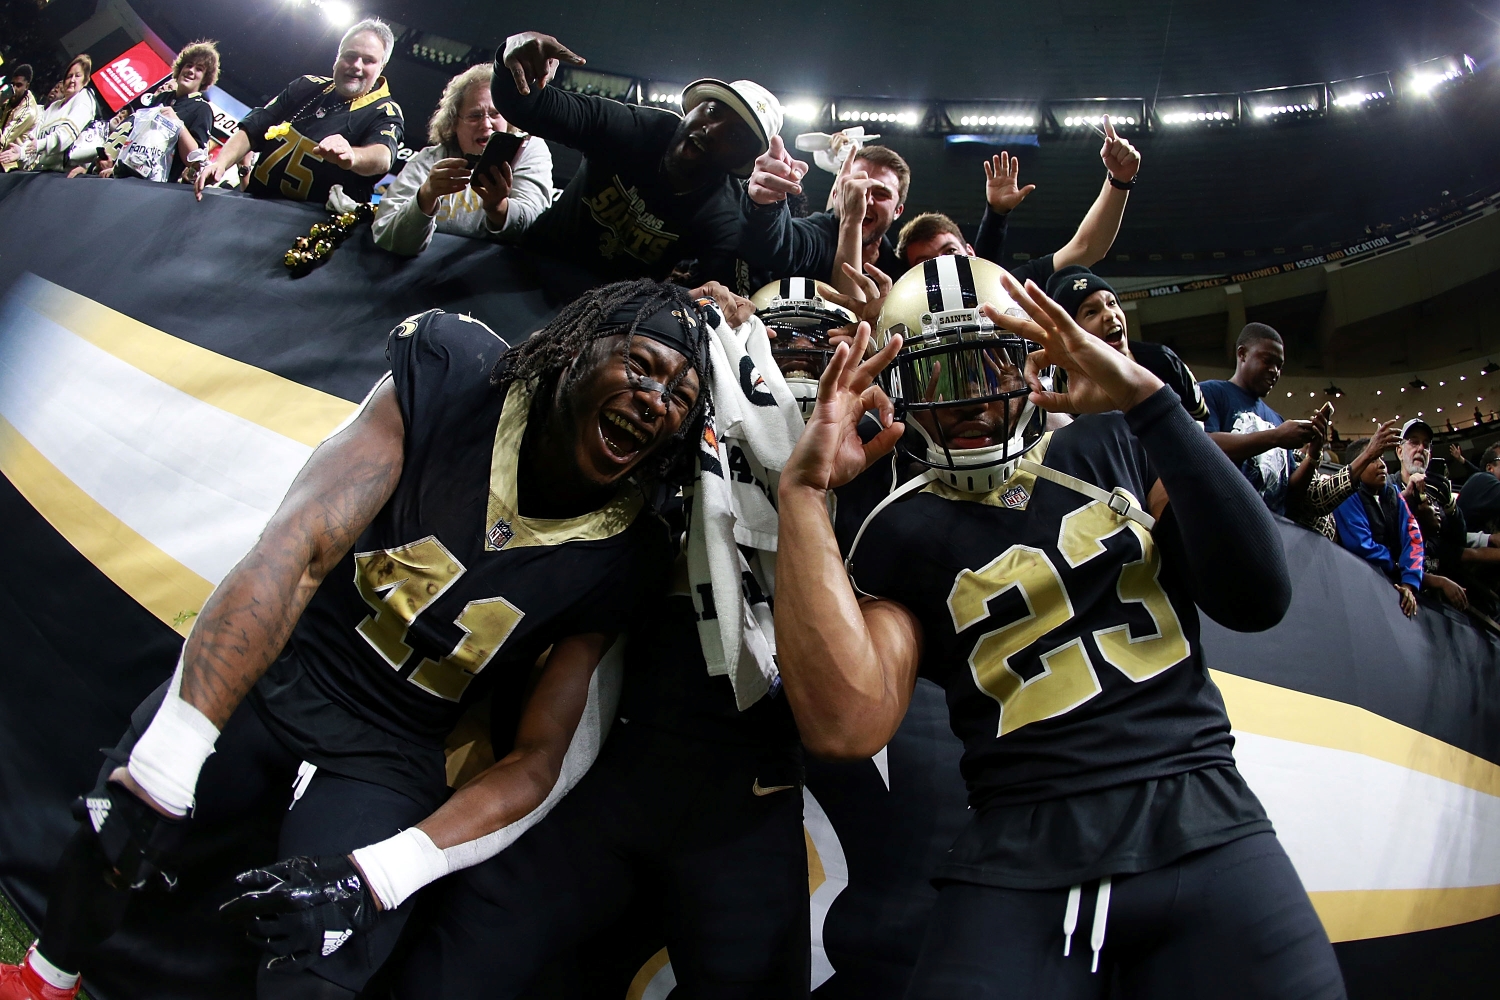 Alvin Kamara, Michael Thomas, and Marshon Lattimore celebrate a victory with New Orleans Saints fans after a game from the 2017 season.